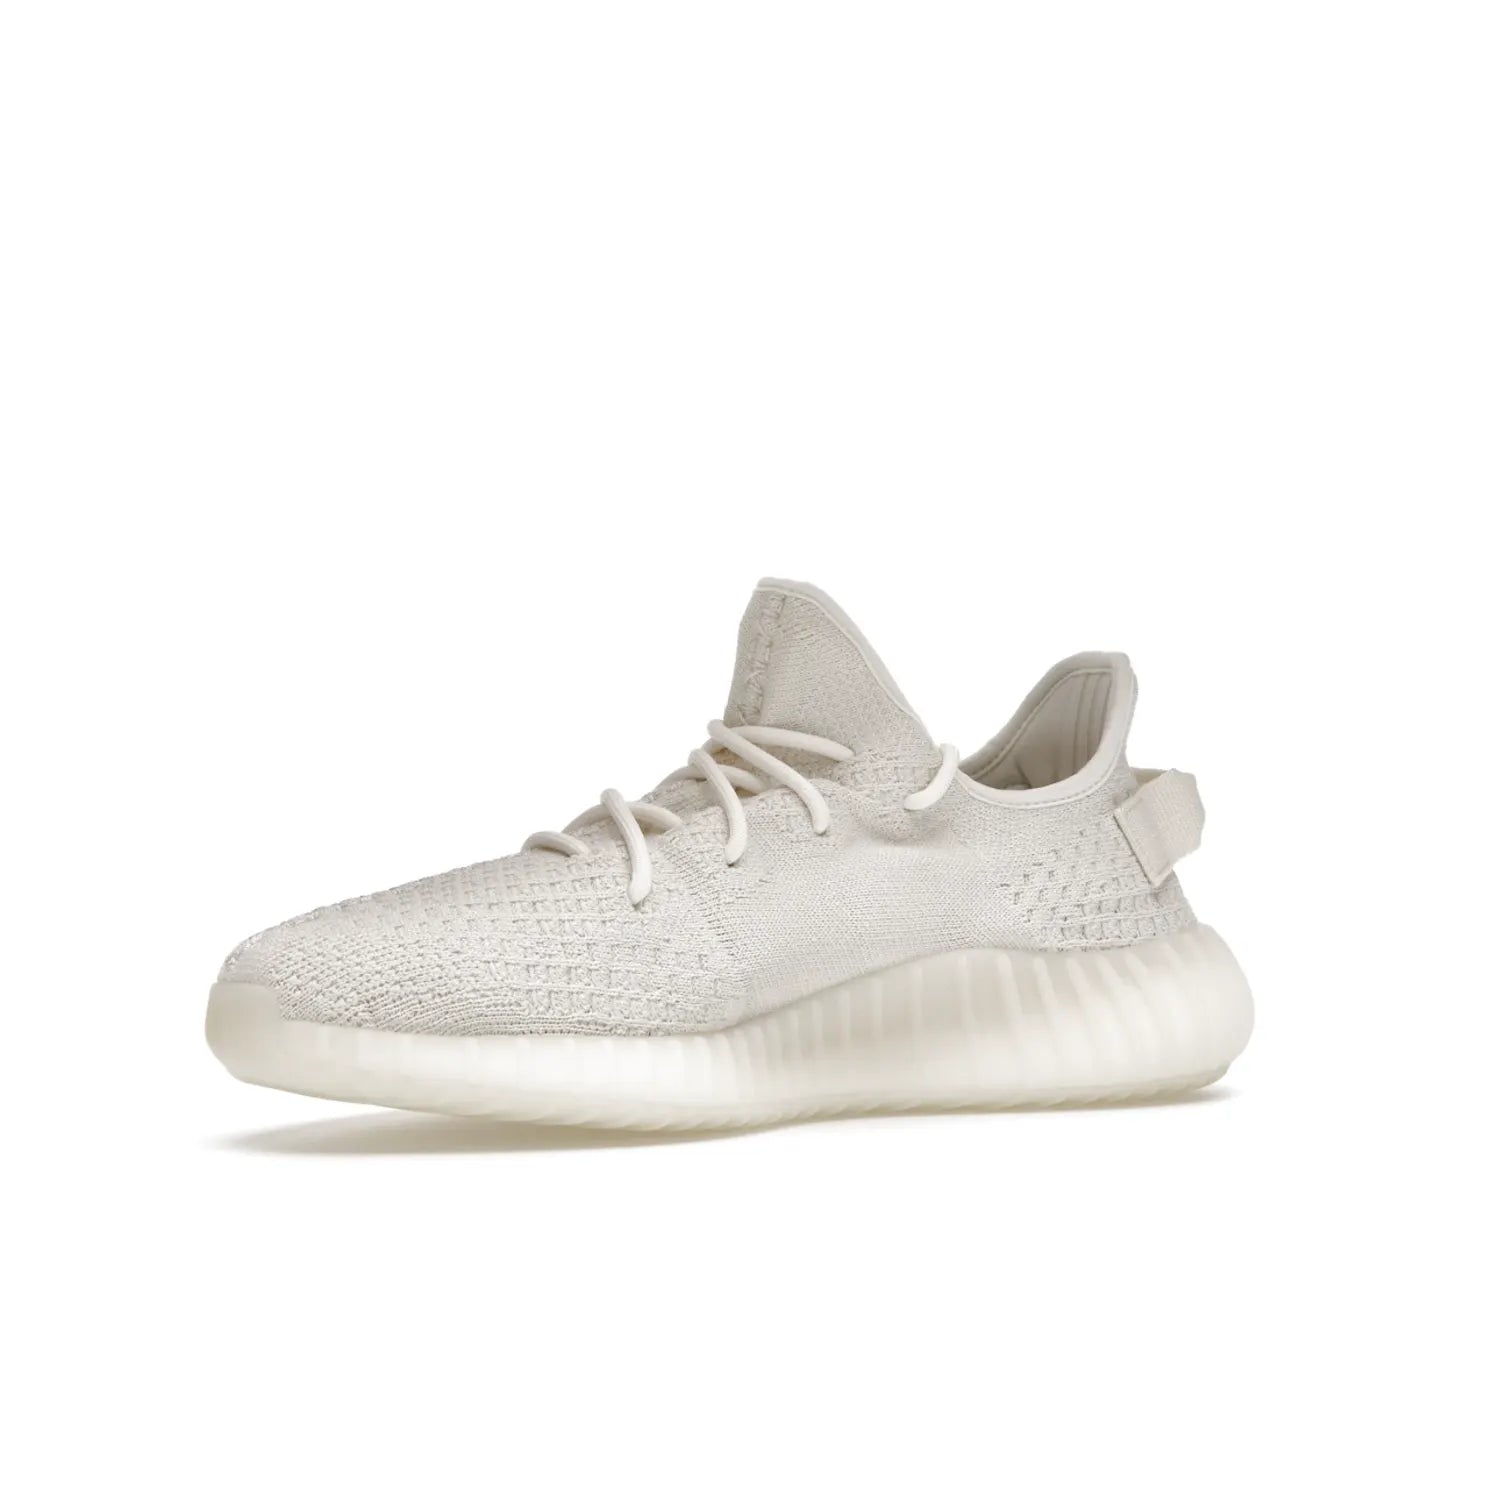 adidas Yeezy Boost 350 V2 Bone - Image 16 - Only at www.BallersClubKickz.com - Grab the stylish and comfortable adidas Yeezy Boost 350 V2 Bone in March 2022. This sneaker features a triple white Primeknit upper, mesh side stripes and canvas heel tabs, sitting atop a semi-translucent sole with Boost technology. Sure to keep your feet comfortable and stylish!